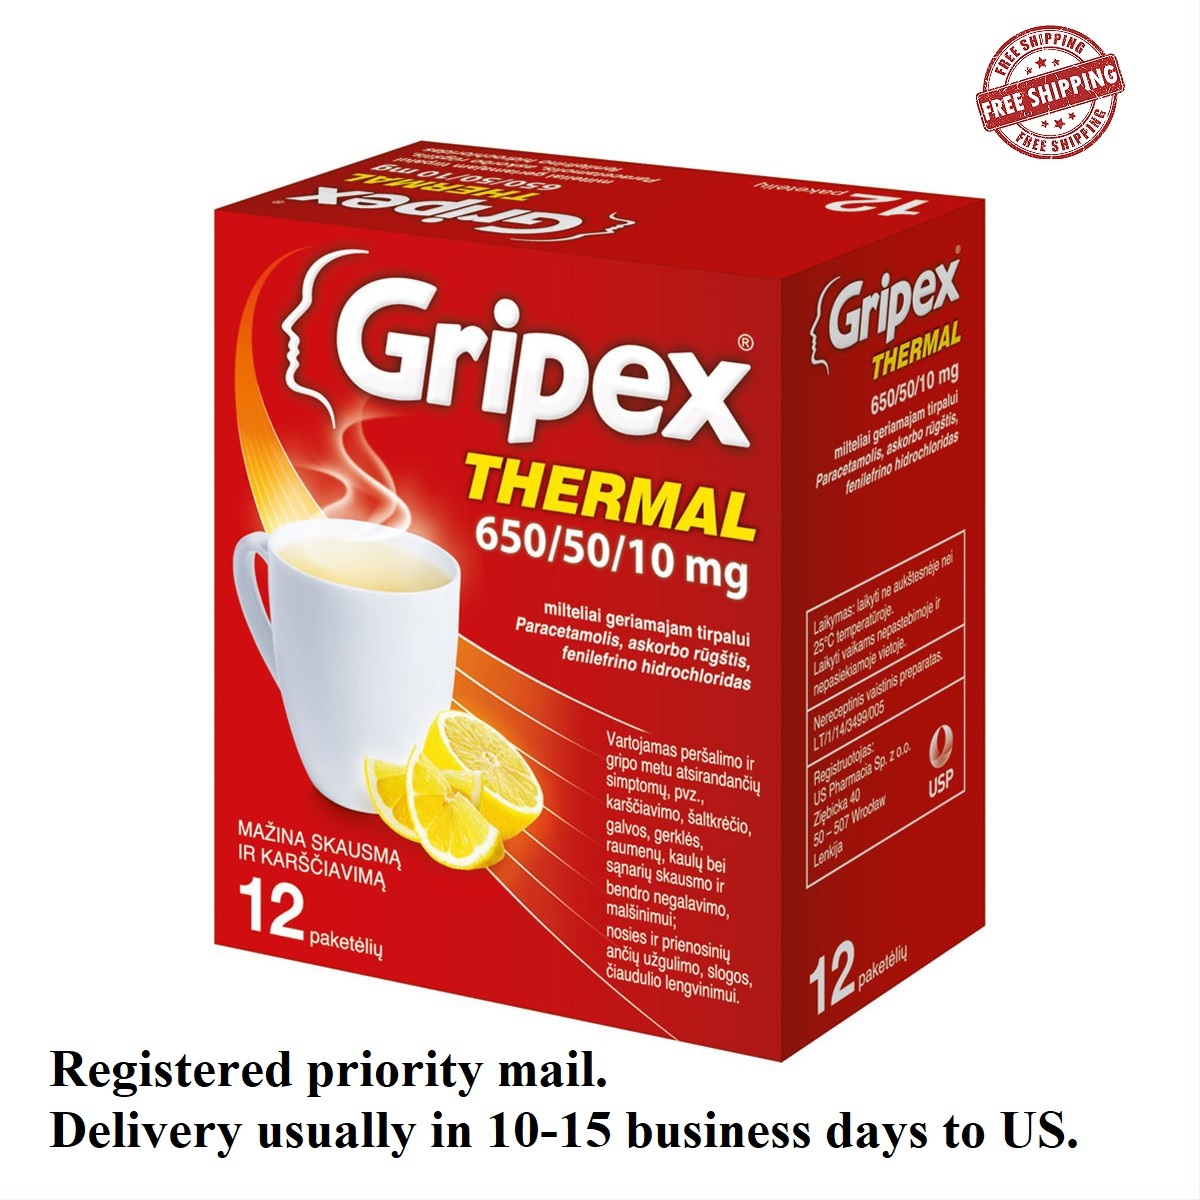 N12 GRIPEX THERMAL relieves cold, flu symptoms such as fever, headaches, throats - $34.71